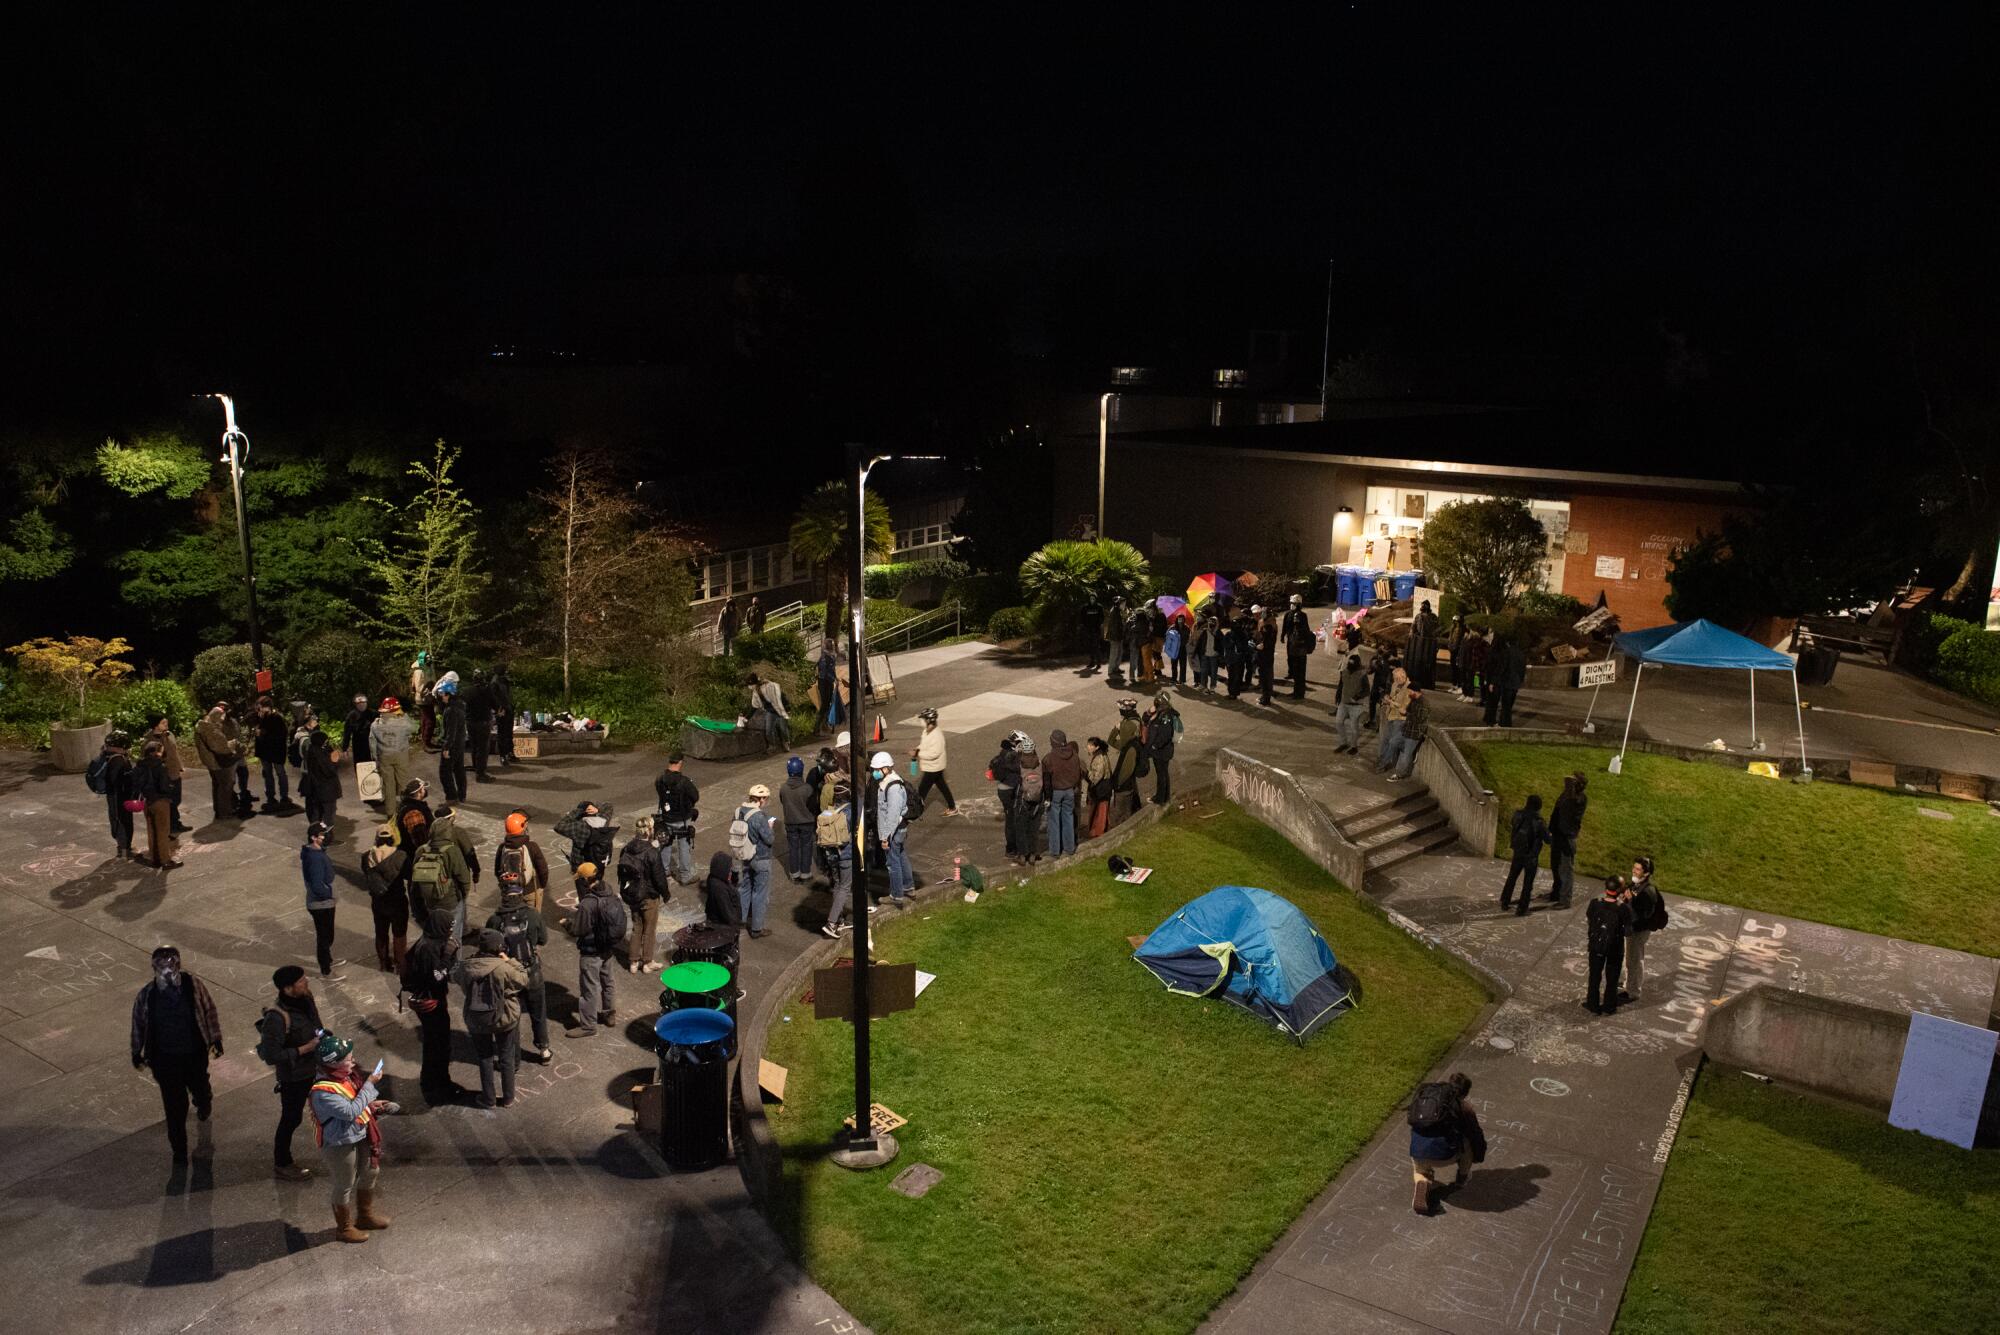 Students line a sidewalk near a tent outside a campus building.